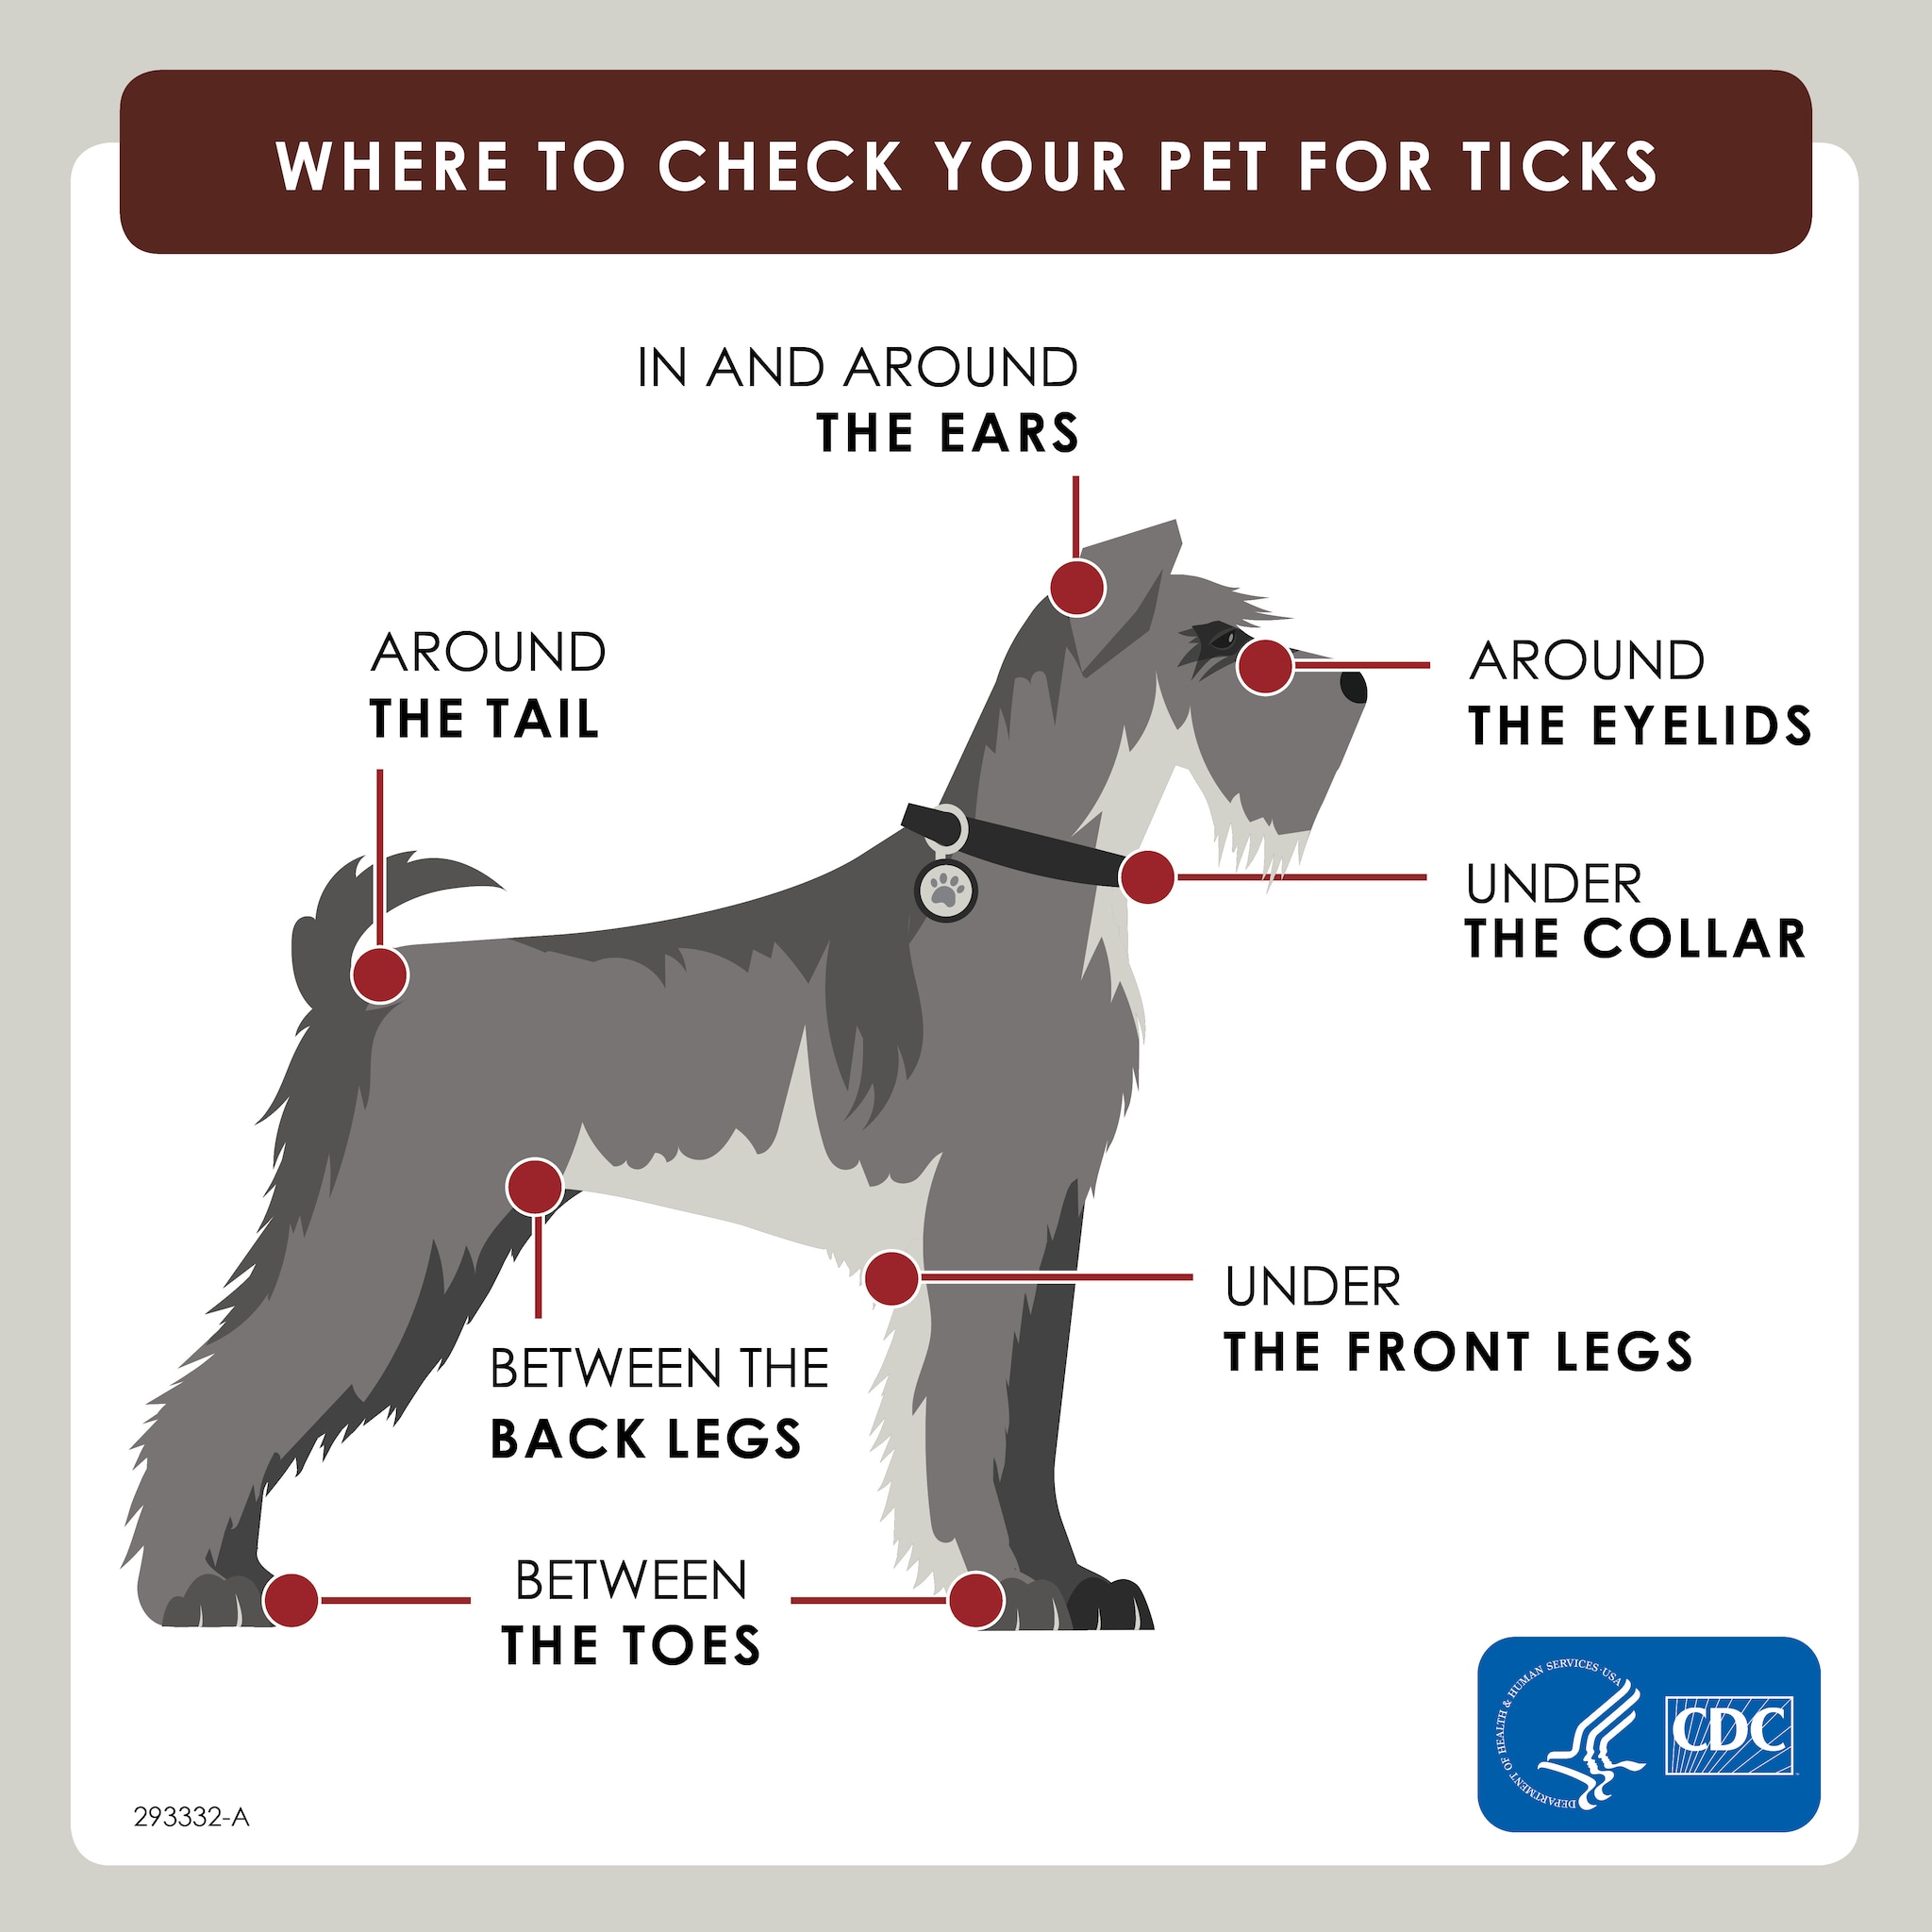 Diagram of a dog illustrating where on the animal to look for ticks.